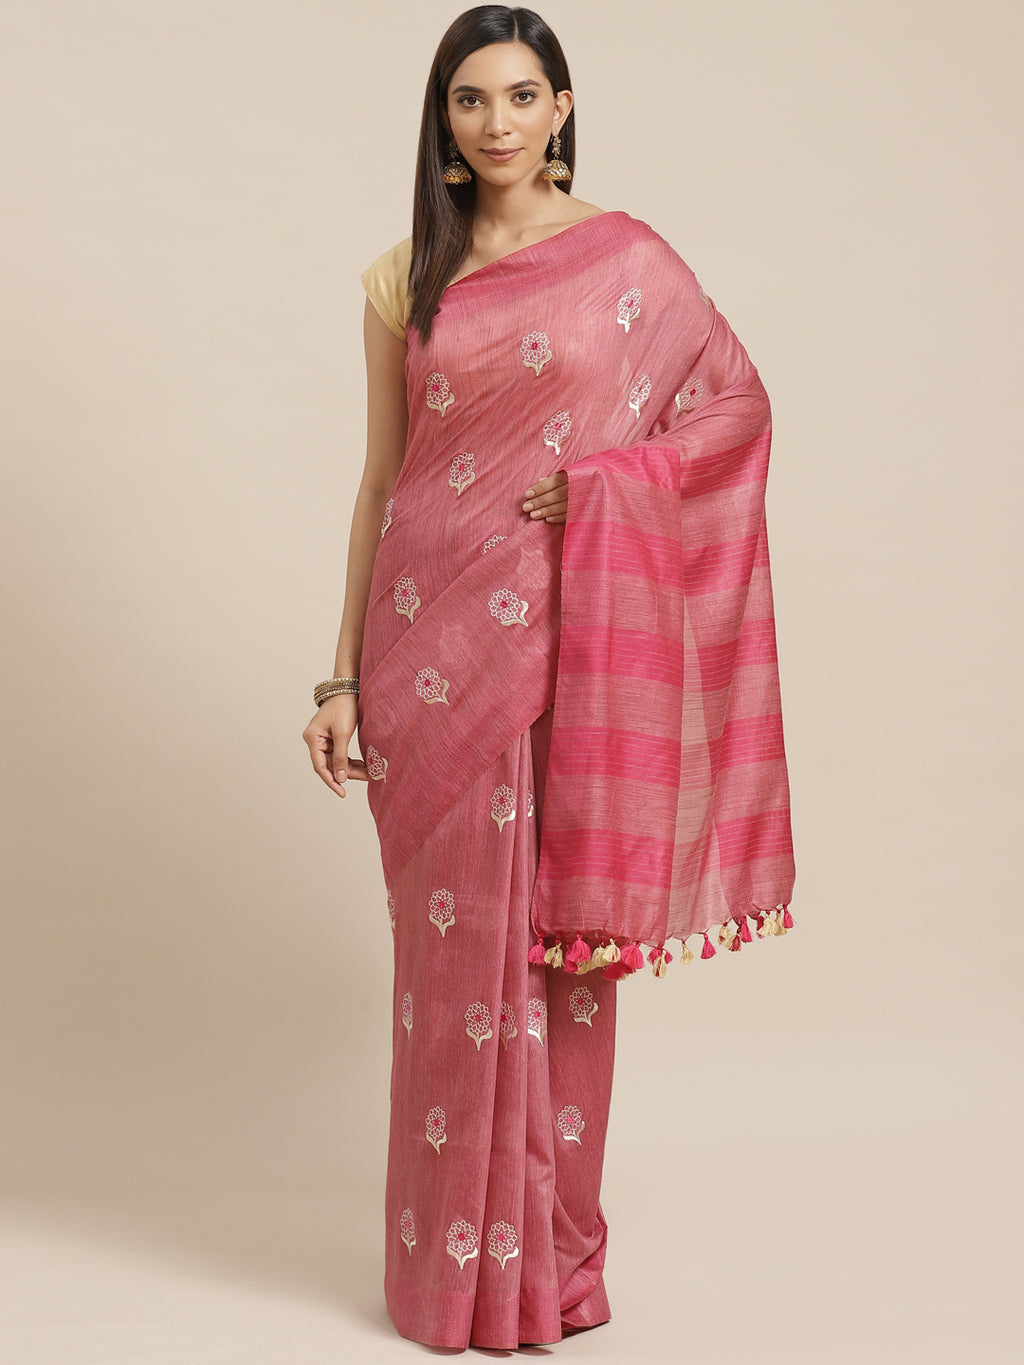 Magenta and Pink, Kalakari India Linen Woven Saree and Blouse ALBGSA0077-Saree-Kalakari India-ALBGSA0077-Cotton, Geographical Indication, Hand Crafted, Heritage Prints, Linen, Natural Dyes, Red, Sarees, Shibori, Sustainable Fabrics, Woven, Yellow-[Linen,Ethnic,wear,Fashionista,Handloom,Handicraft,Indigo,blockprint,block,print,Cotton,Chanderi,Blue, latest,classy,party,bollywood,trendy,summer,style,traditional,formal,elegant,unique,style,hand,block,print, dabu,booti,gift,present,glamorous,affordab